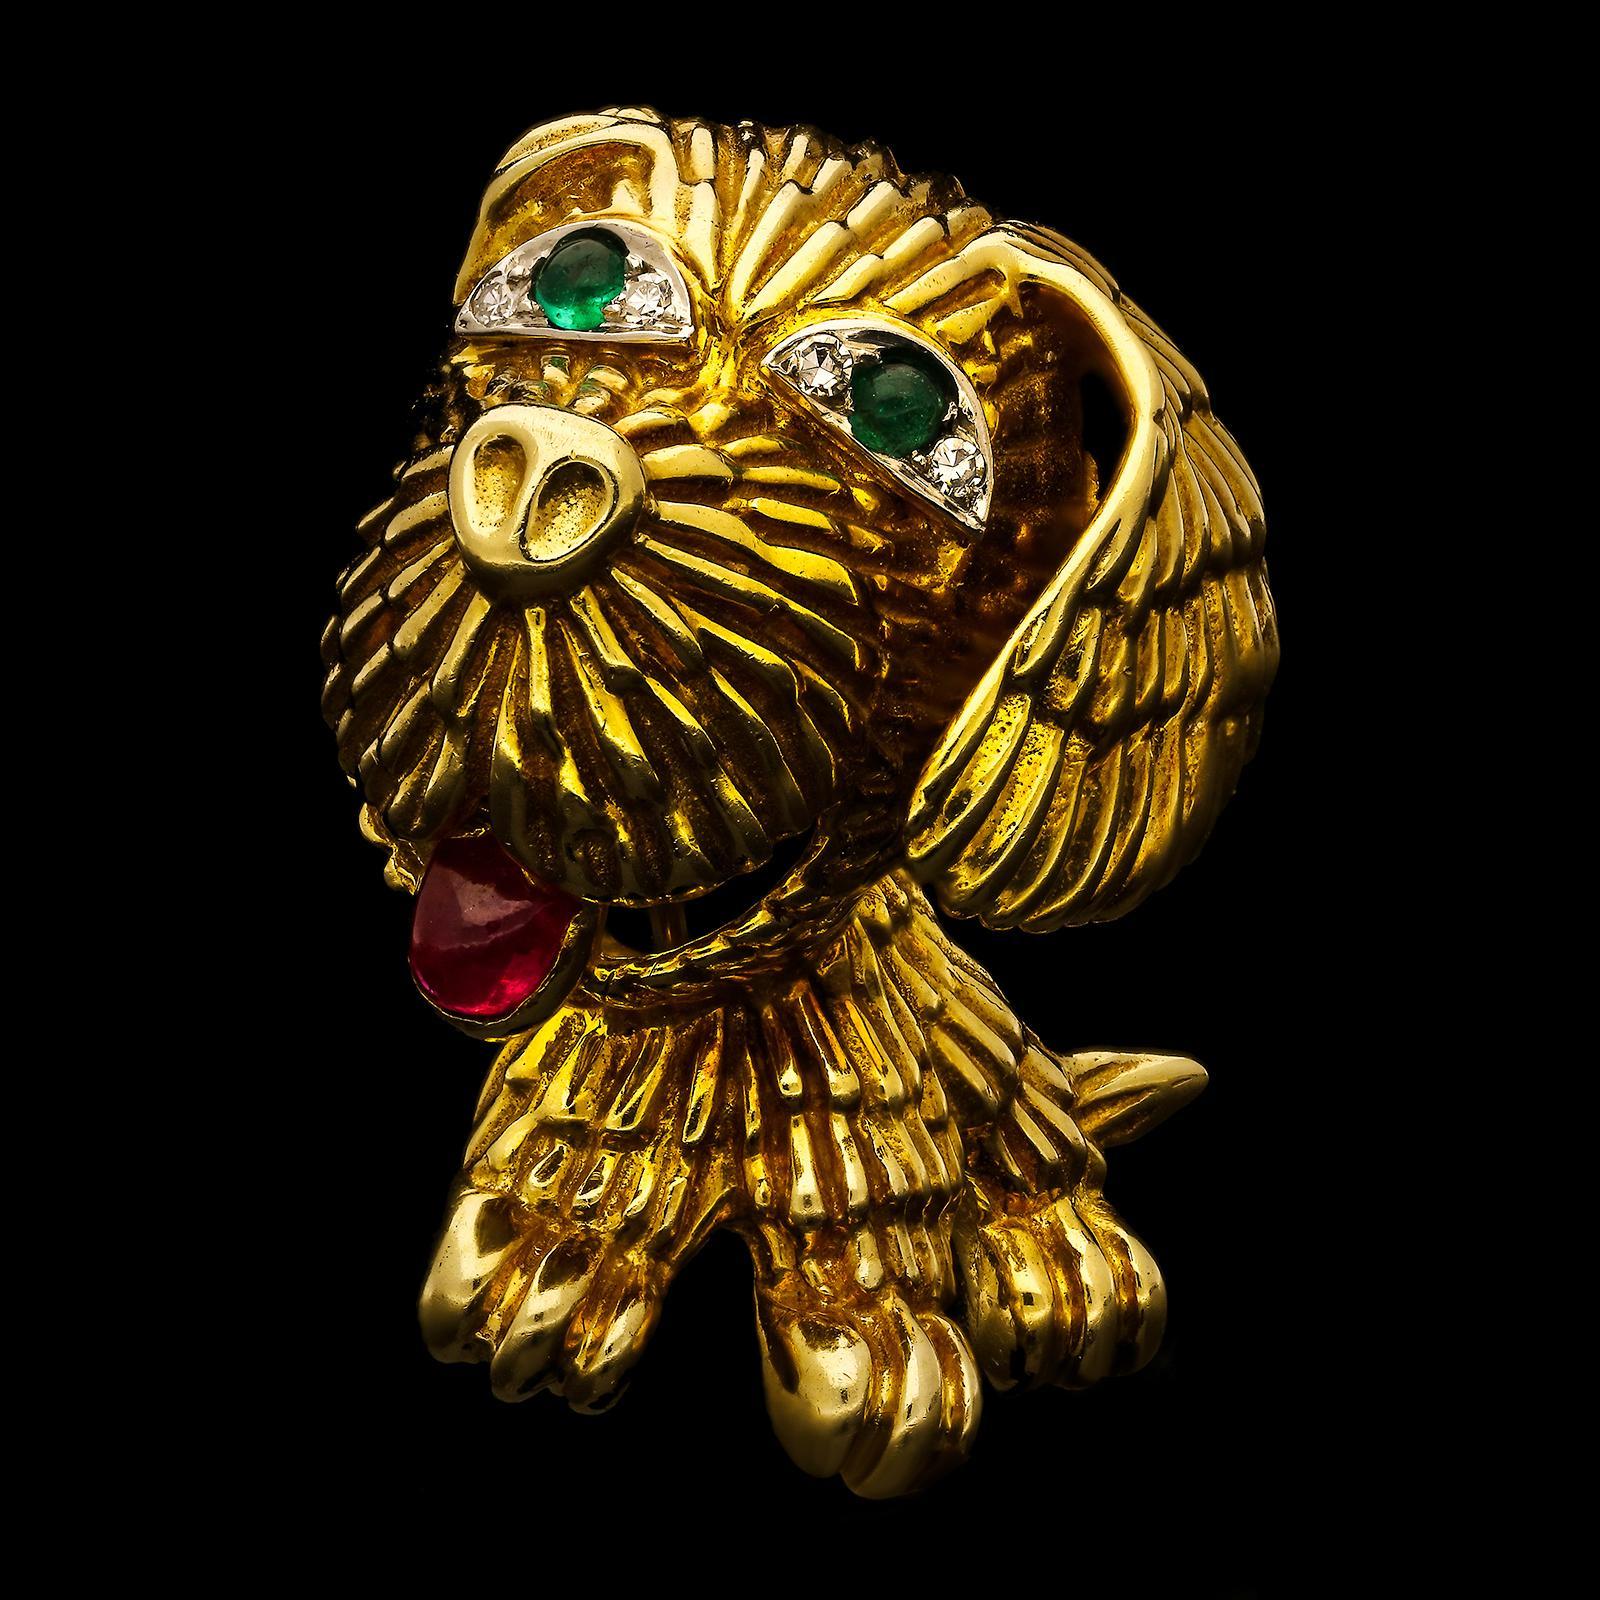 A delightful 18ct gold and gemstone brooch by Van Cleef & Arpels c.1960s, finely modelled as a three dimensional little dog in seated position with large floppy ears and textured fur formed from gold wire, the eyes set with a cabochon emerald and